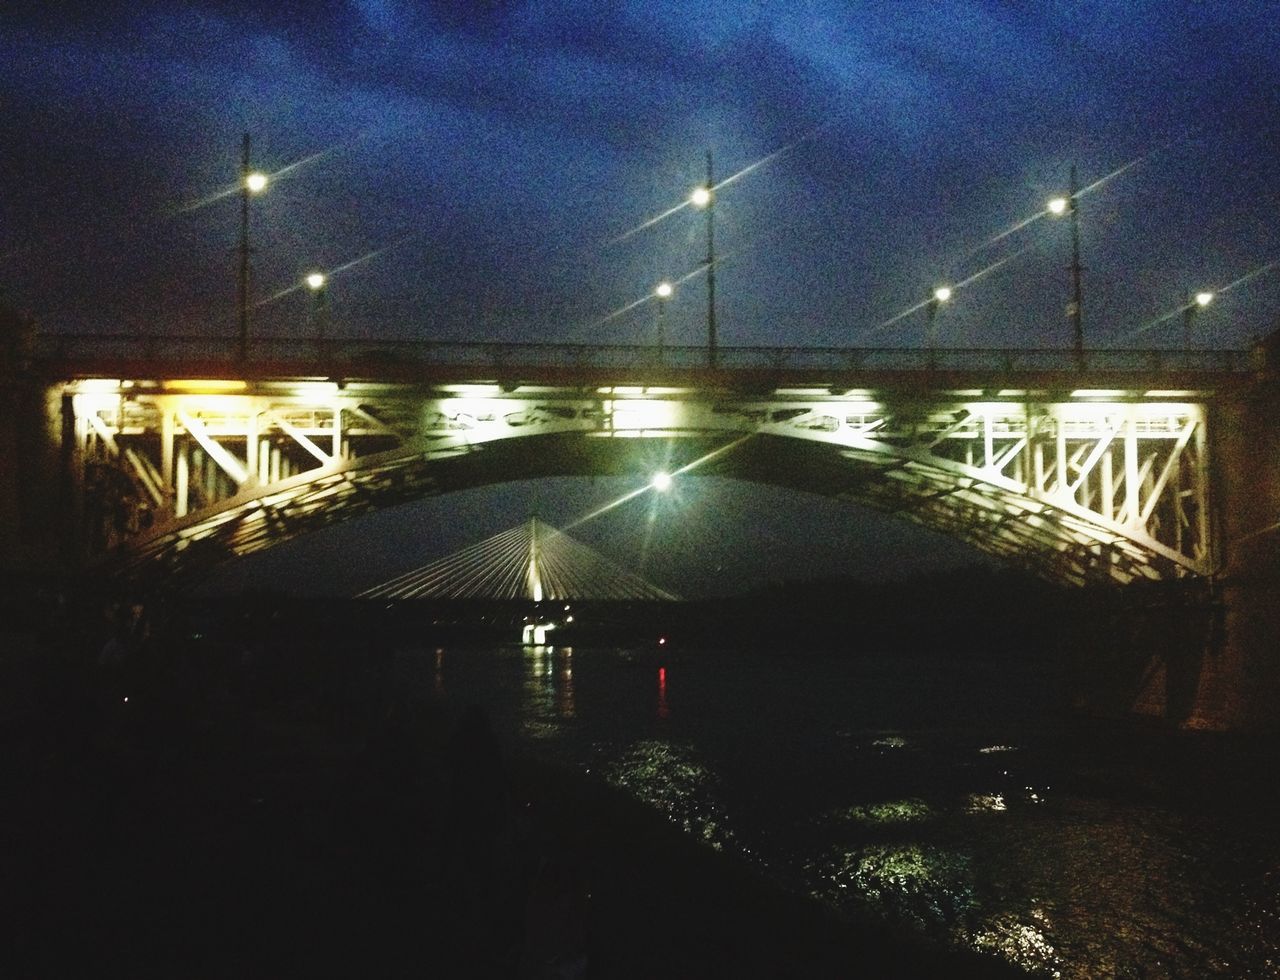 night, illuminated, street light, built structure, architecture, bridge - man made structure, lighting equipment, water, connection, railing, sky, transportation, the way forward, no people, reflection, outdoors, empty, river, dusk, bridge